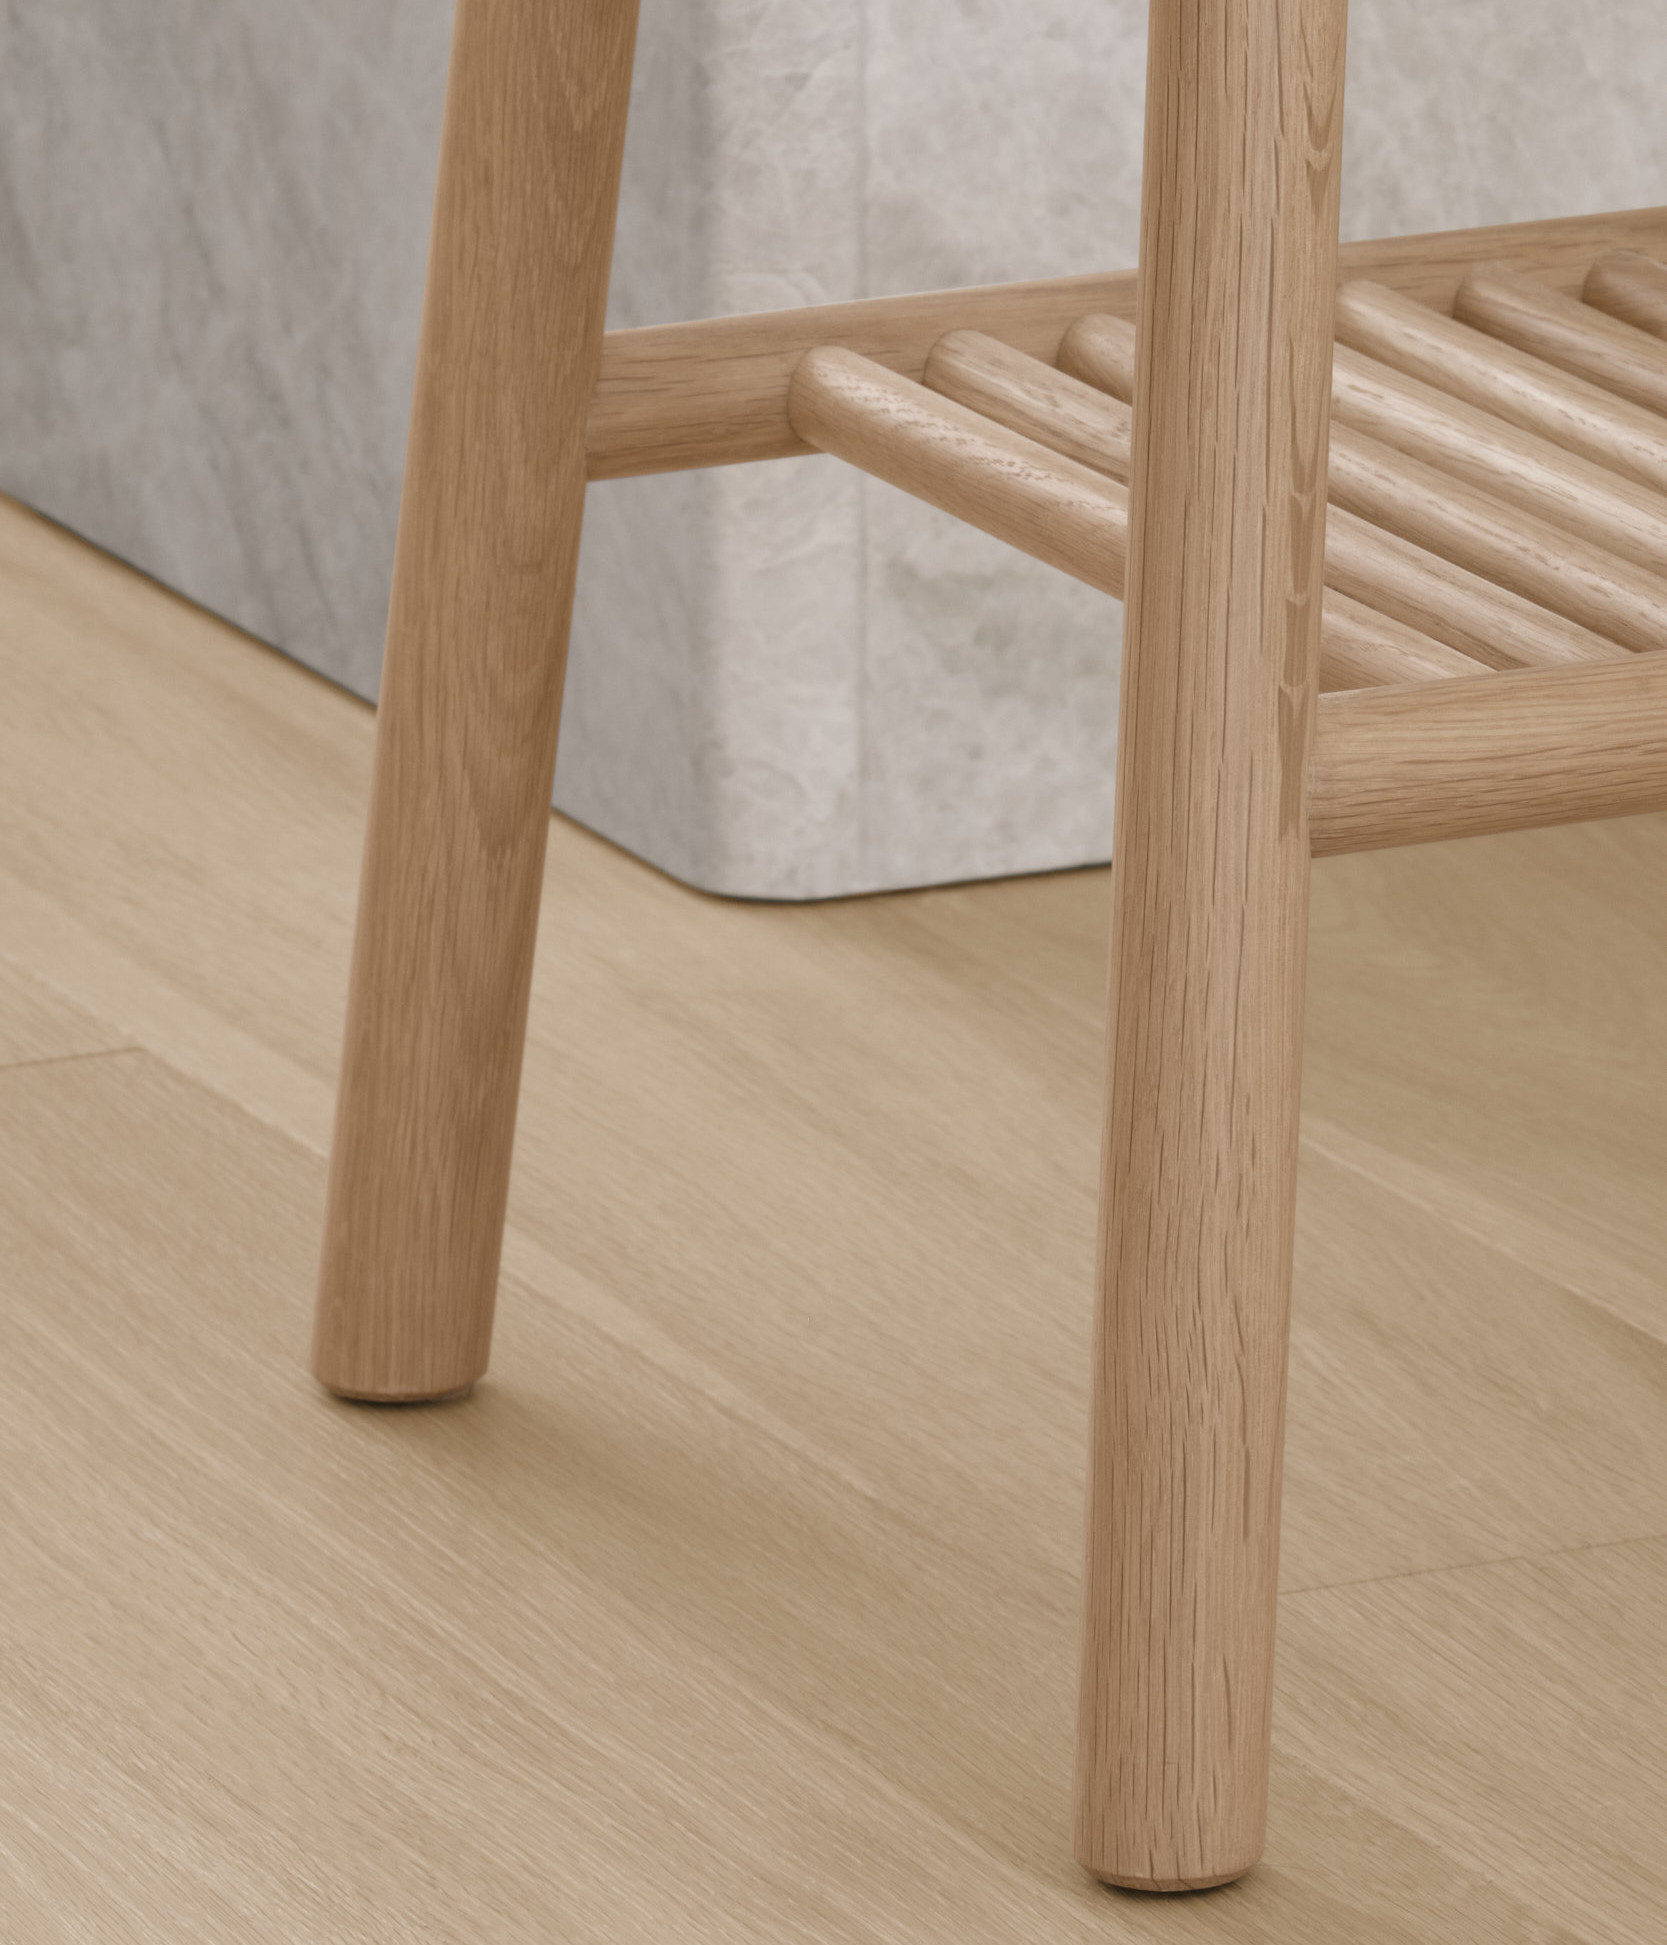 detail of joinery of the tame high stool